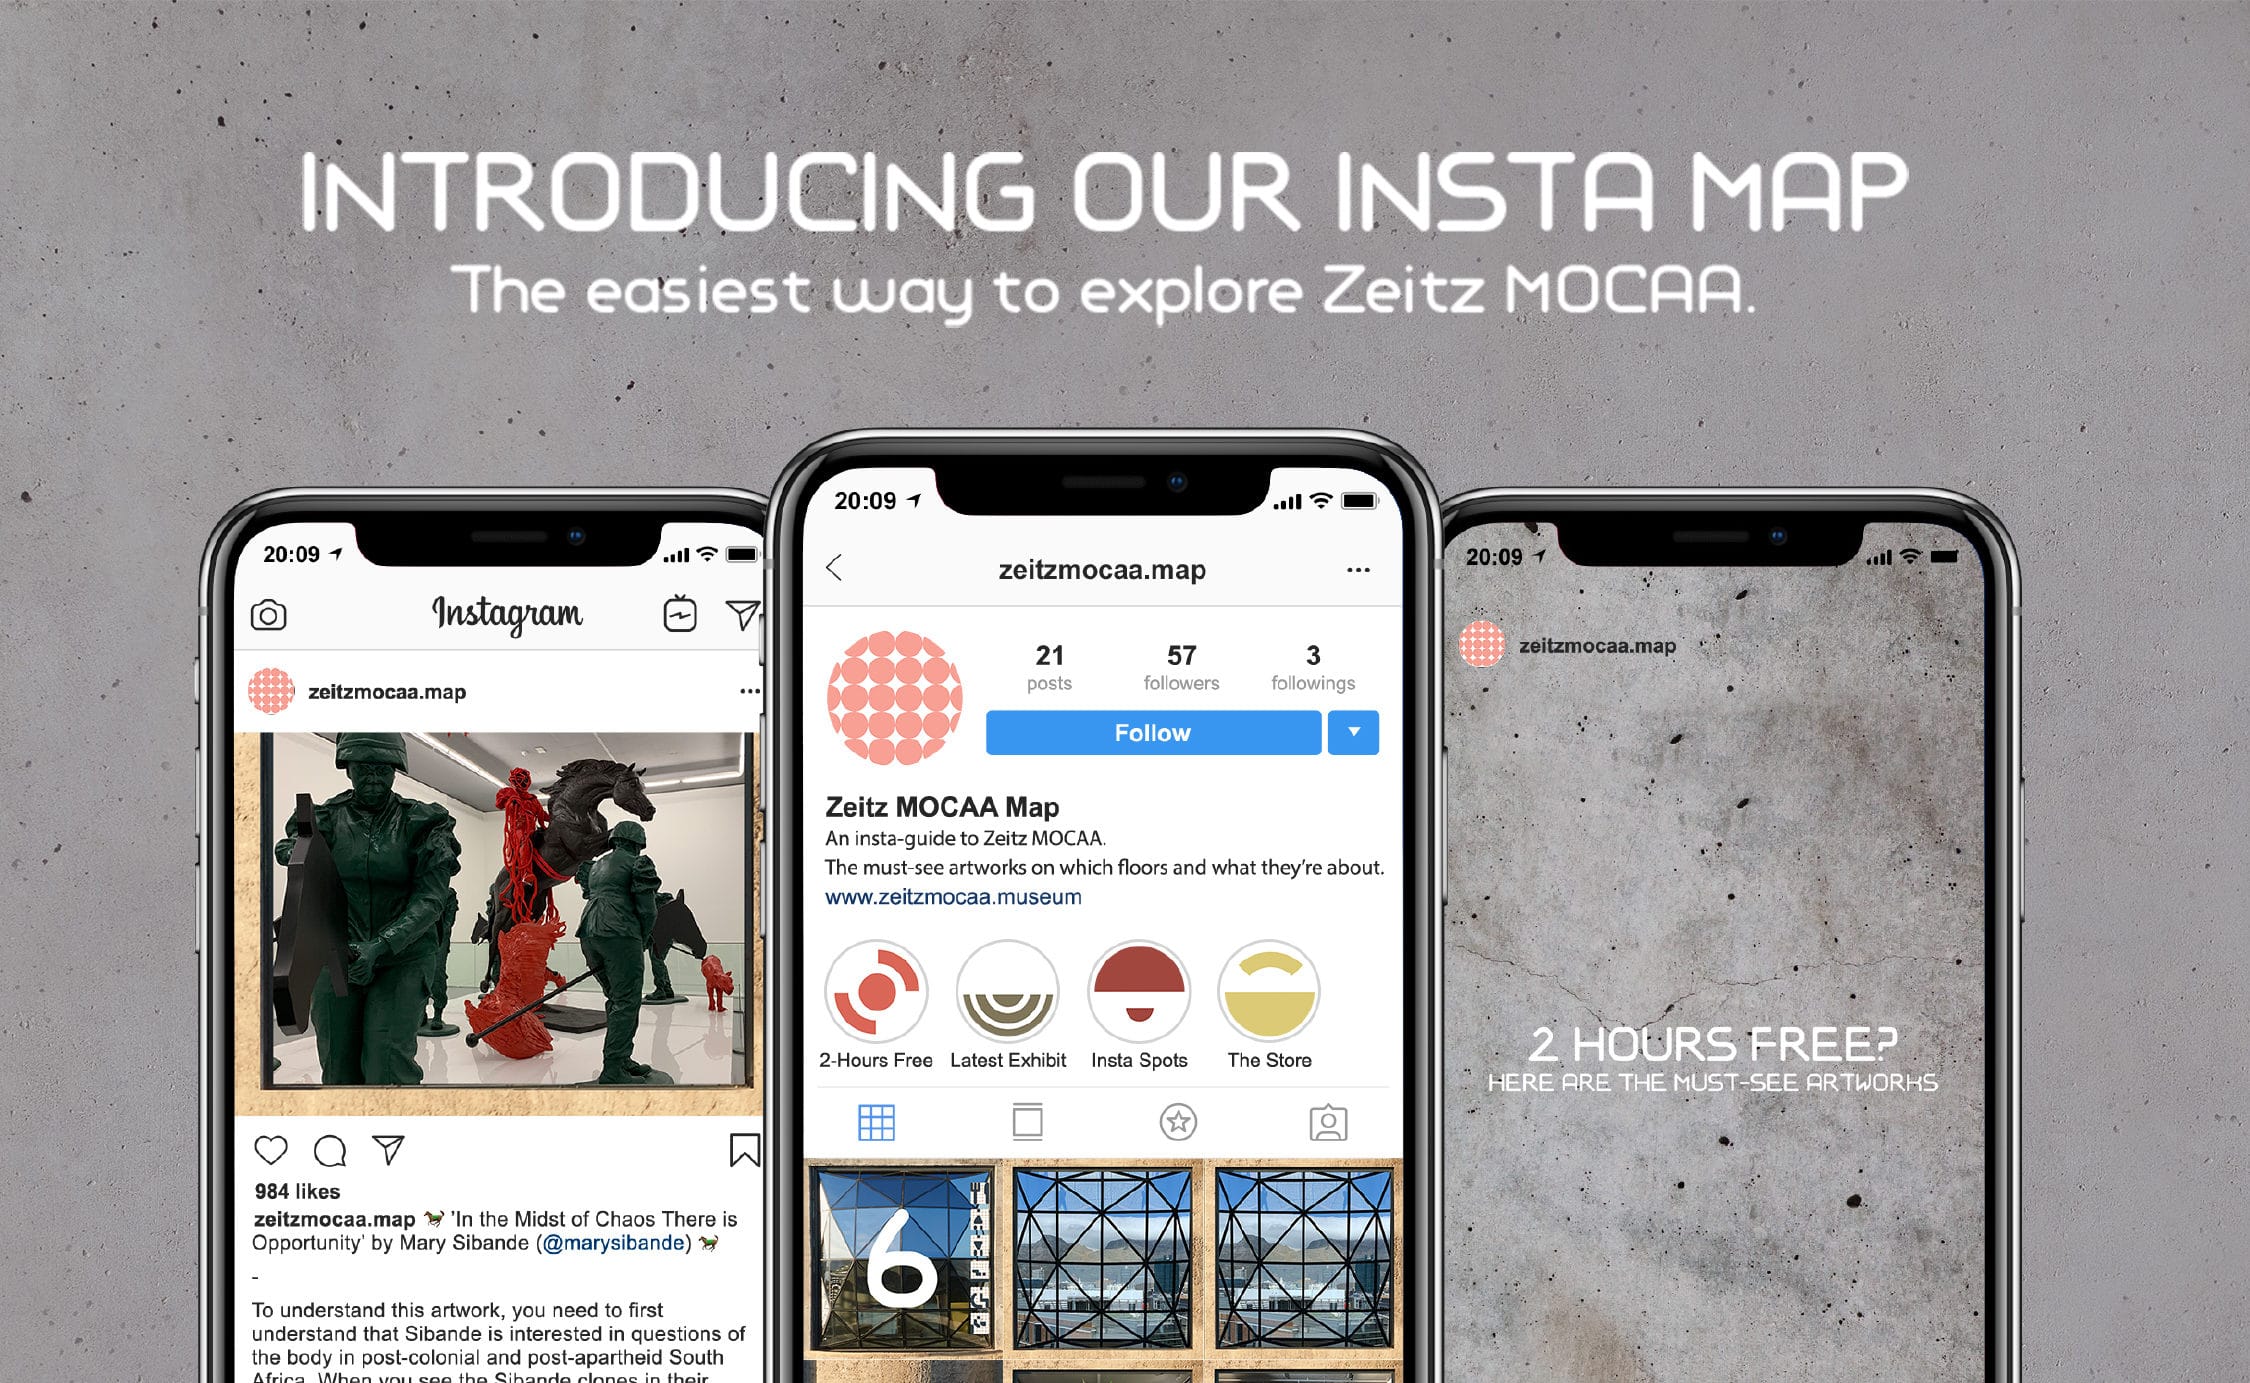 5753Zeitz MOCAA Insta Map: The first museum guide to be created on Instagram